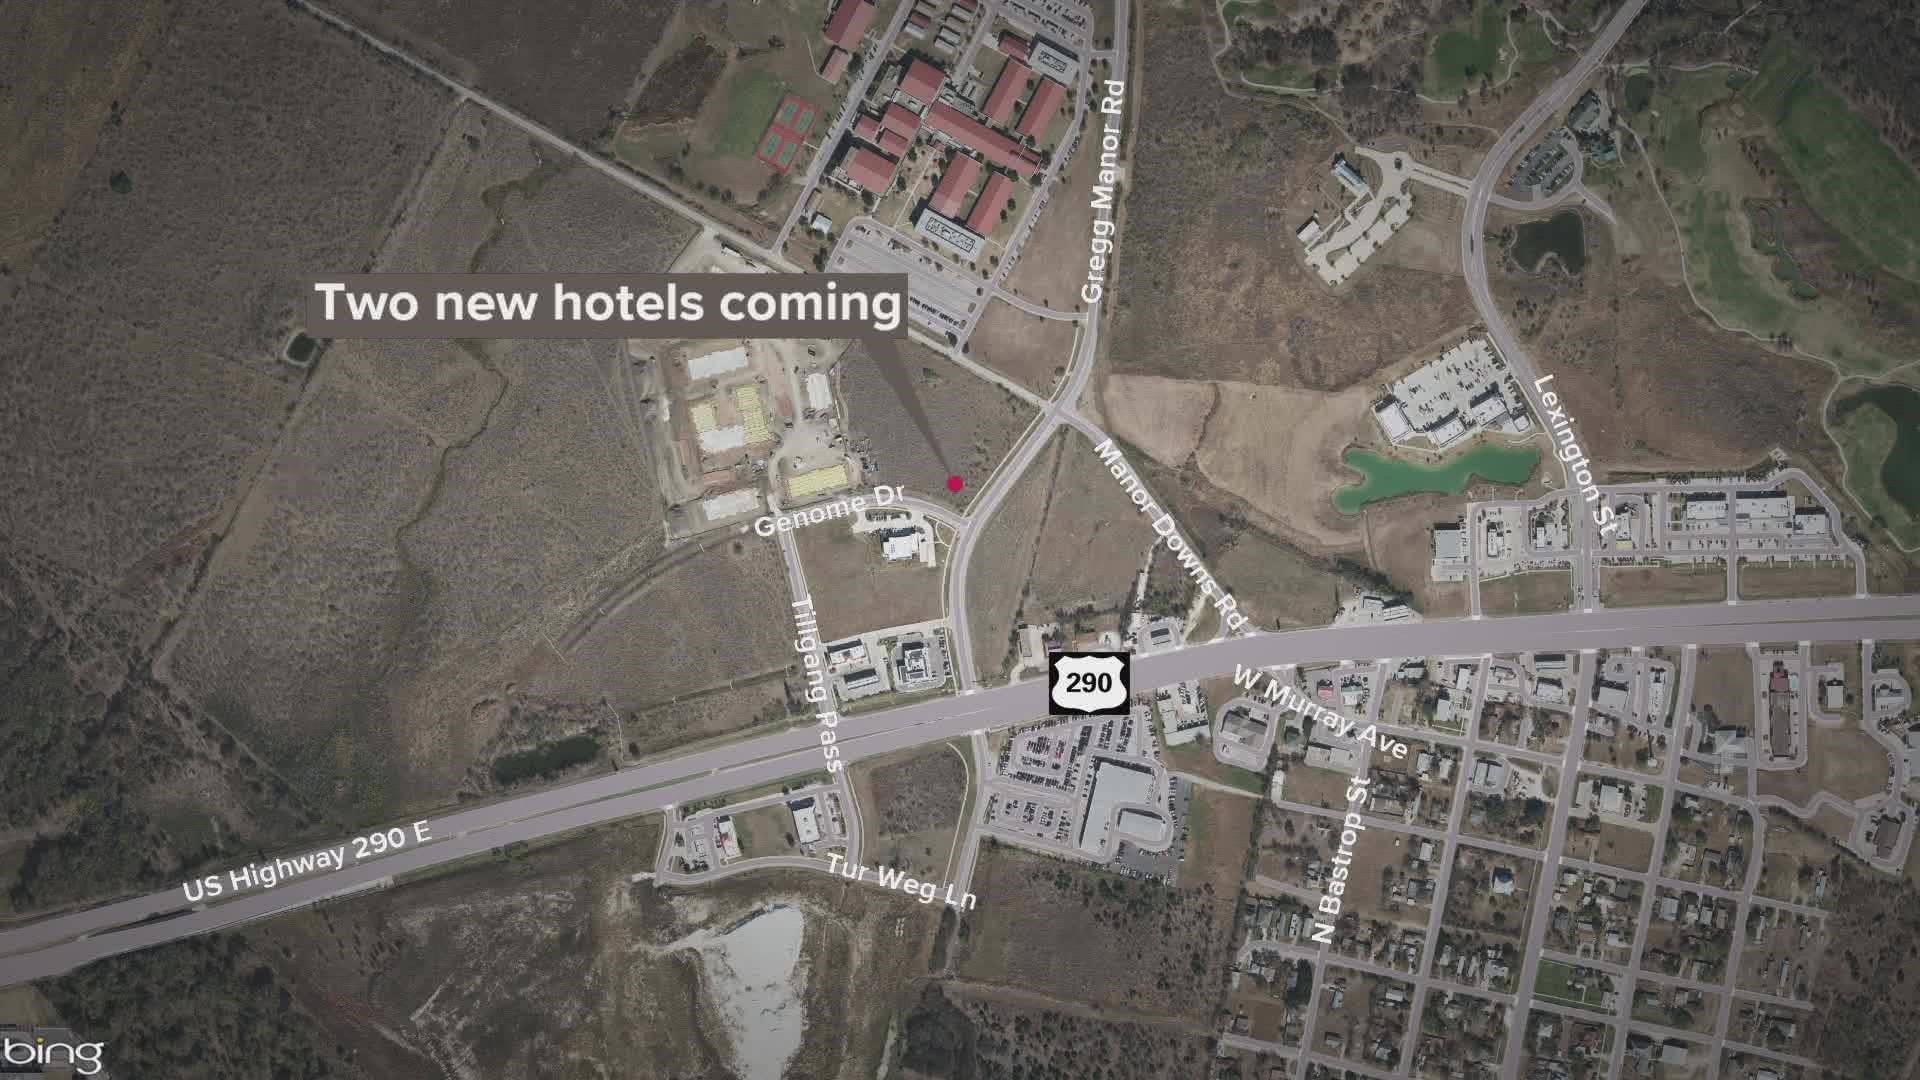 State records show a developer is planning two new hotels in the Manor area.